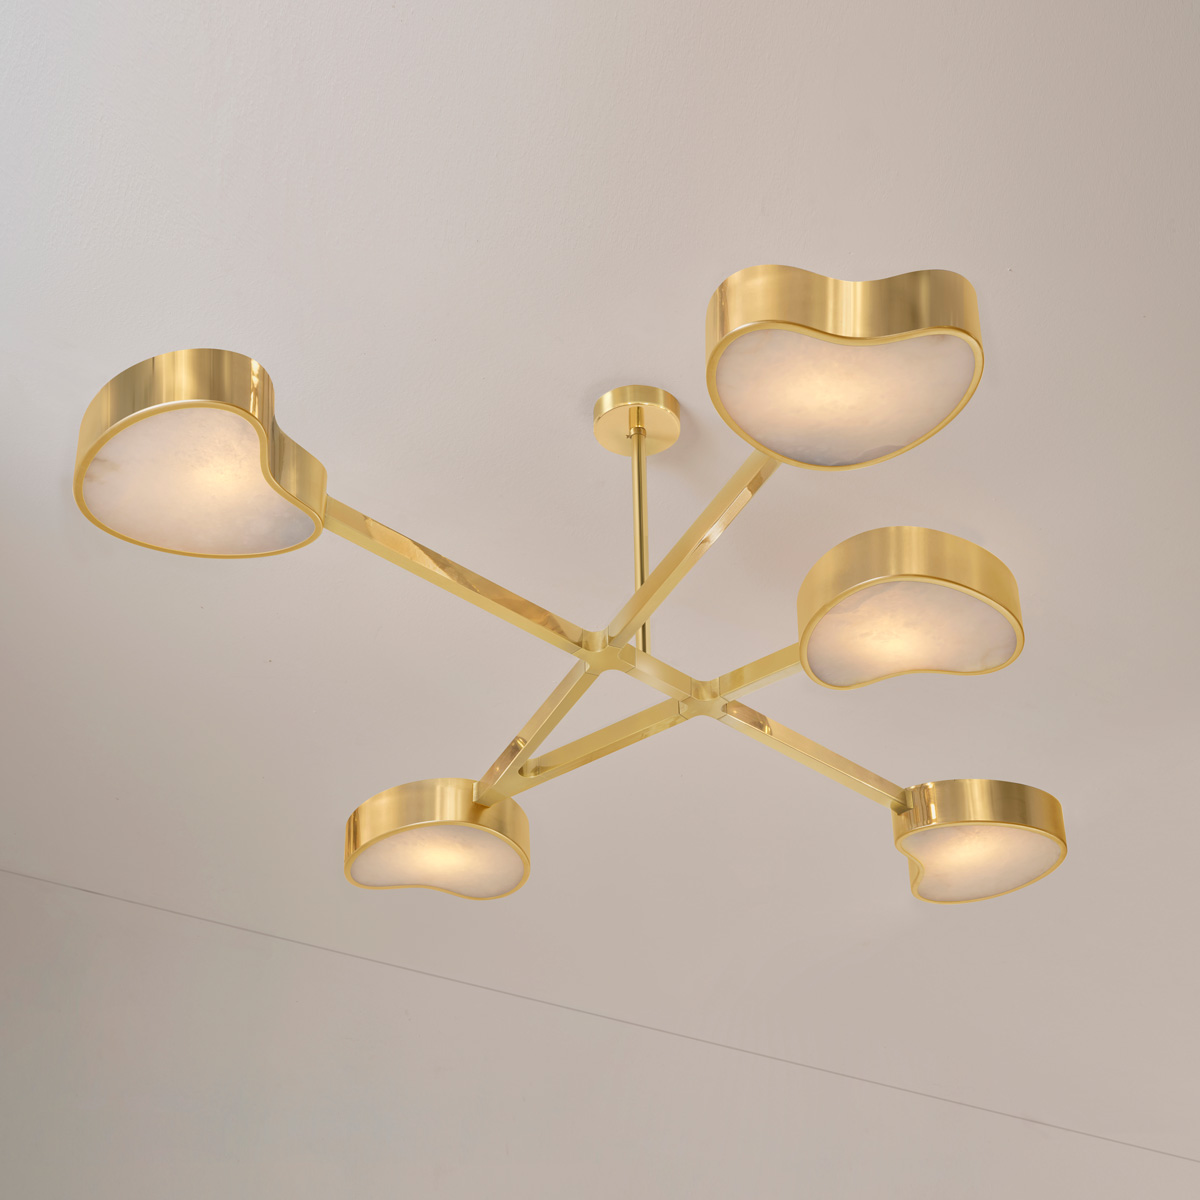 cuore N5 ceiling light by gaspare asaro